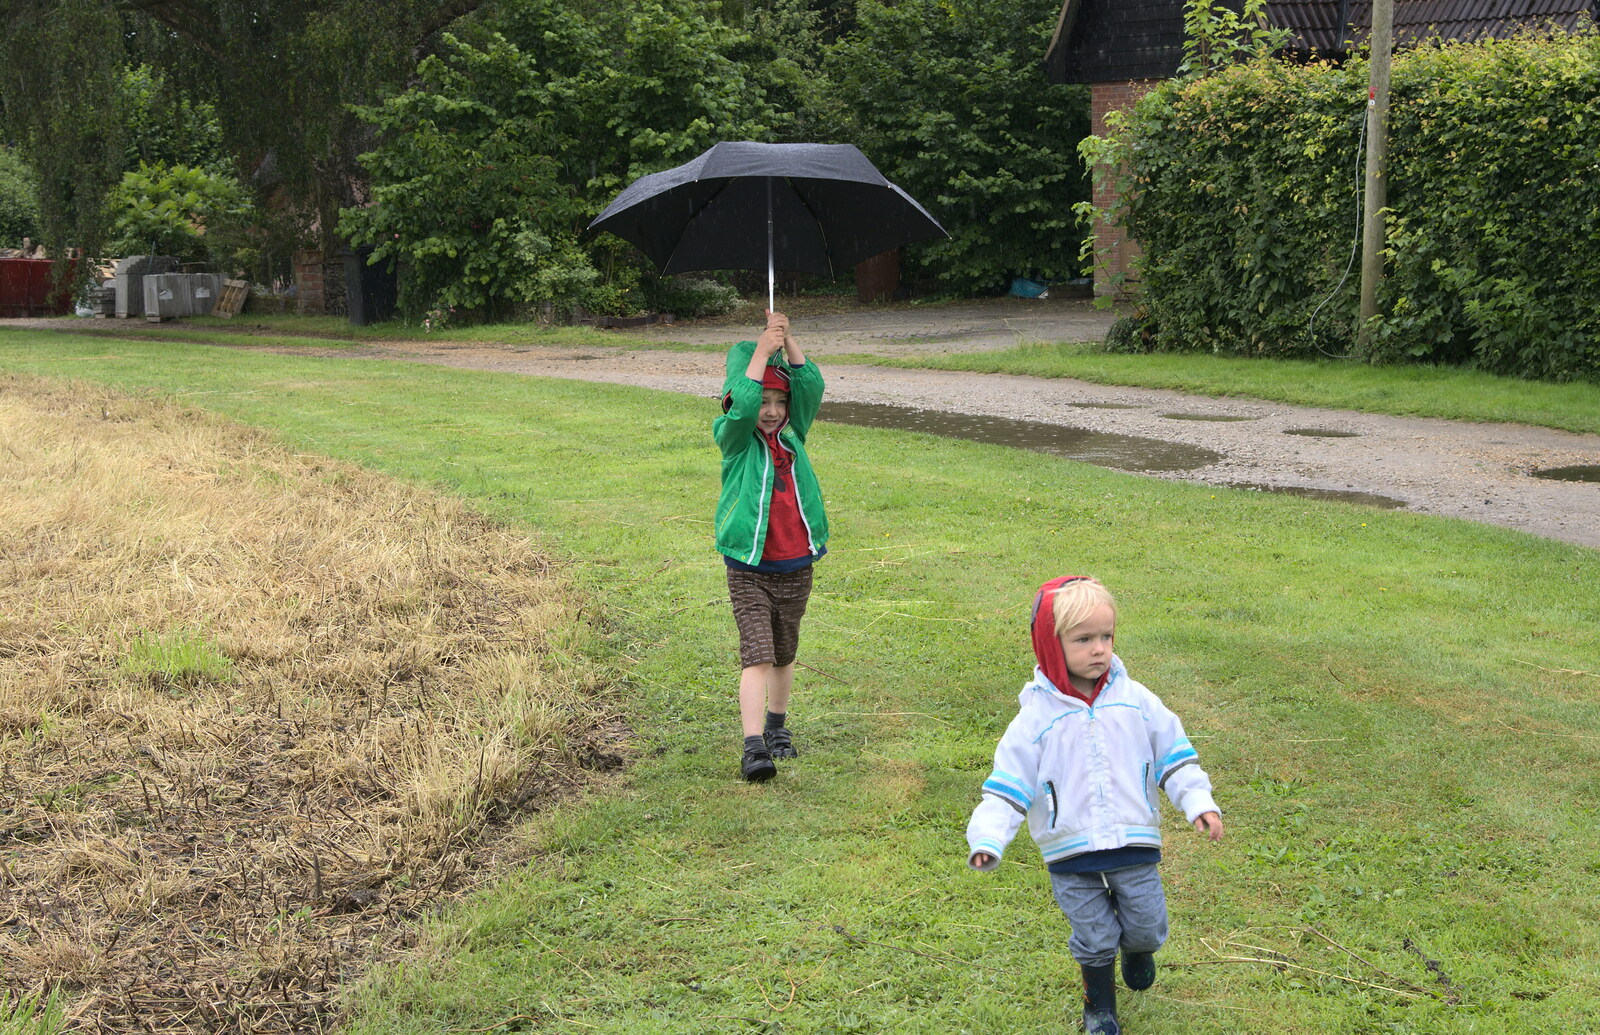 Fred and Harry roam around in the rain from Thrandeston Pig, Little Green, Thrandeston, Suffolk - 29th June 2014